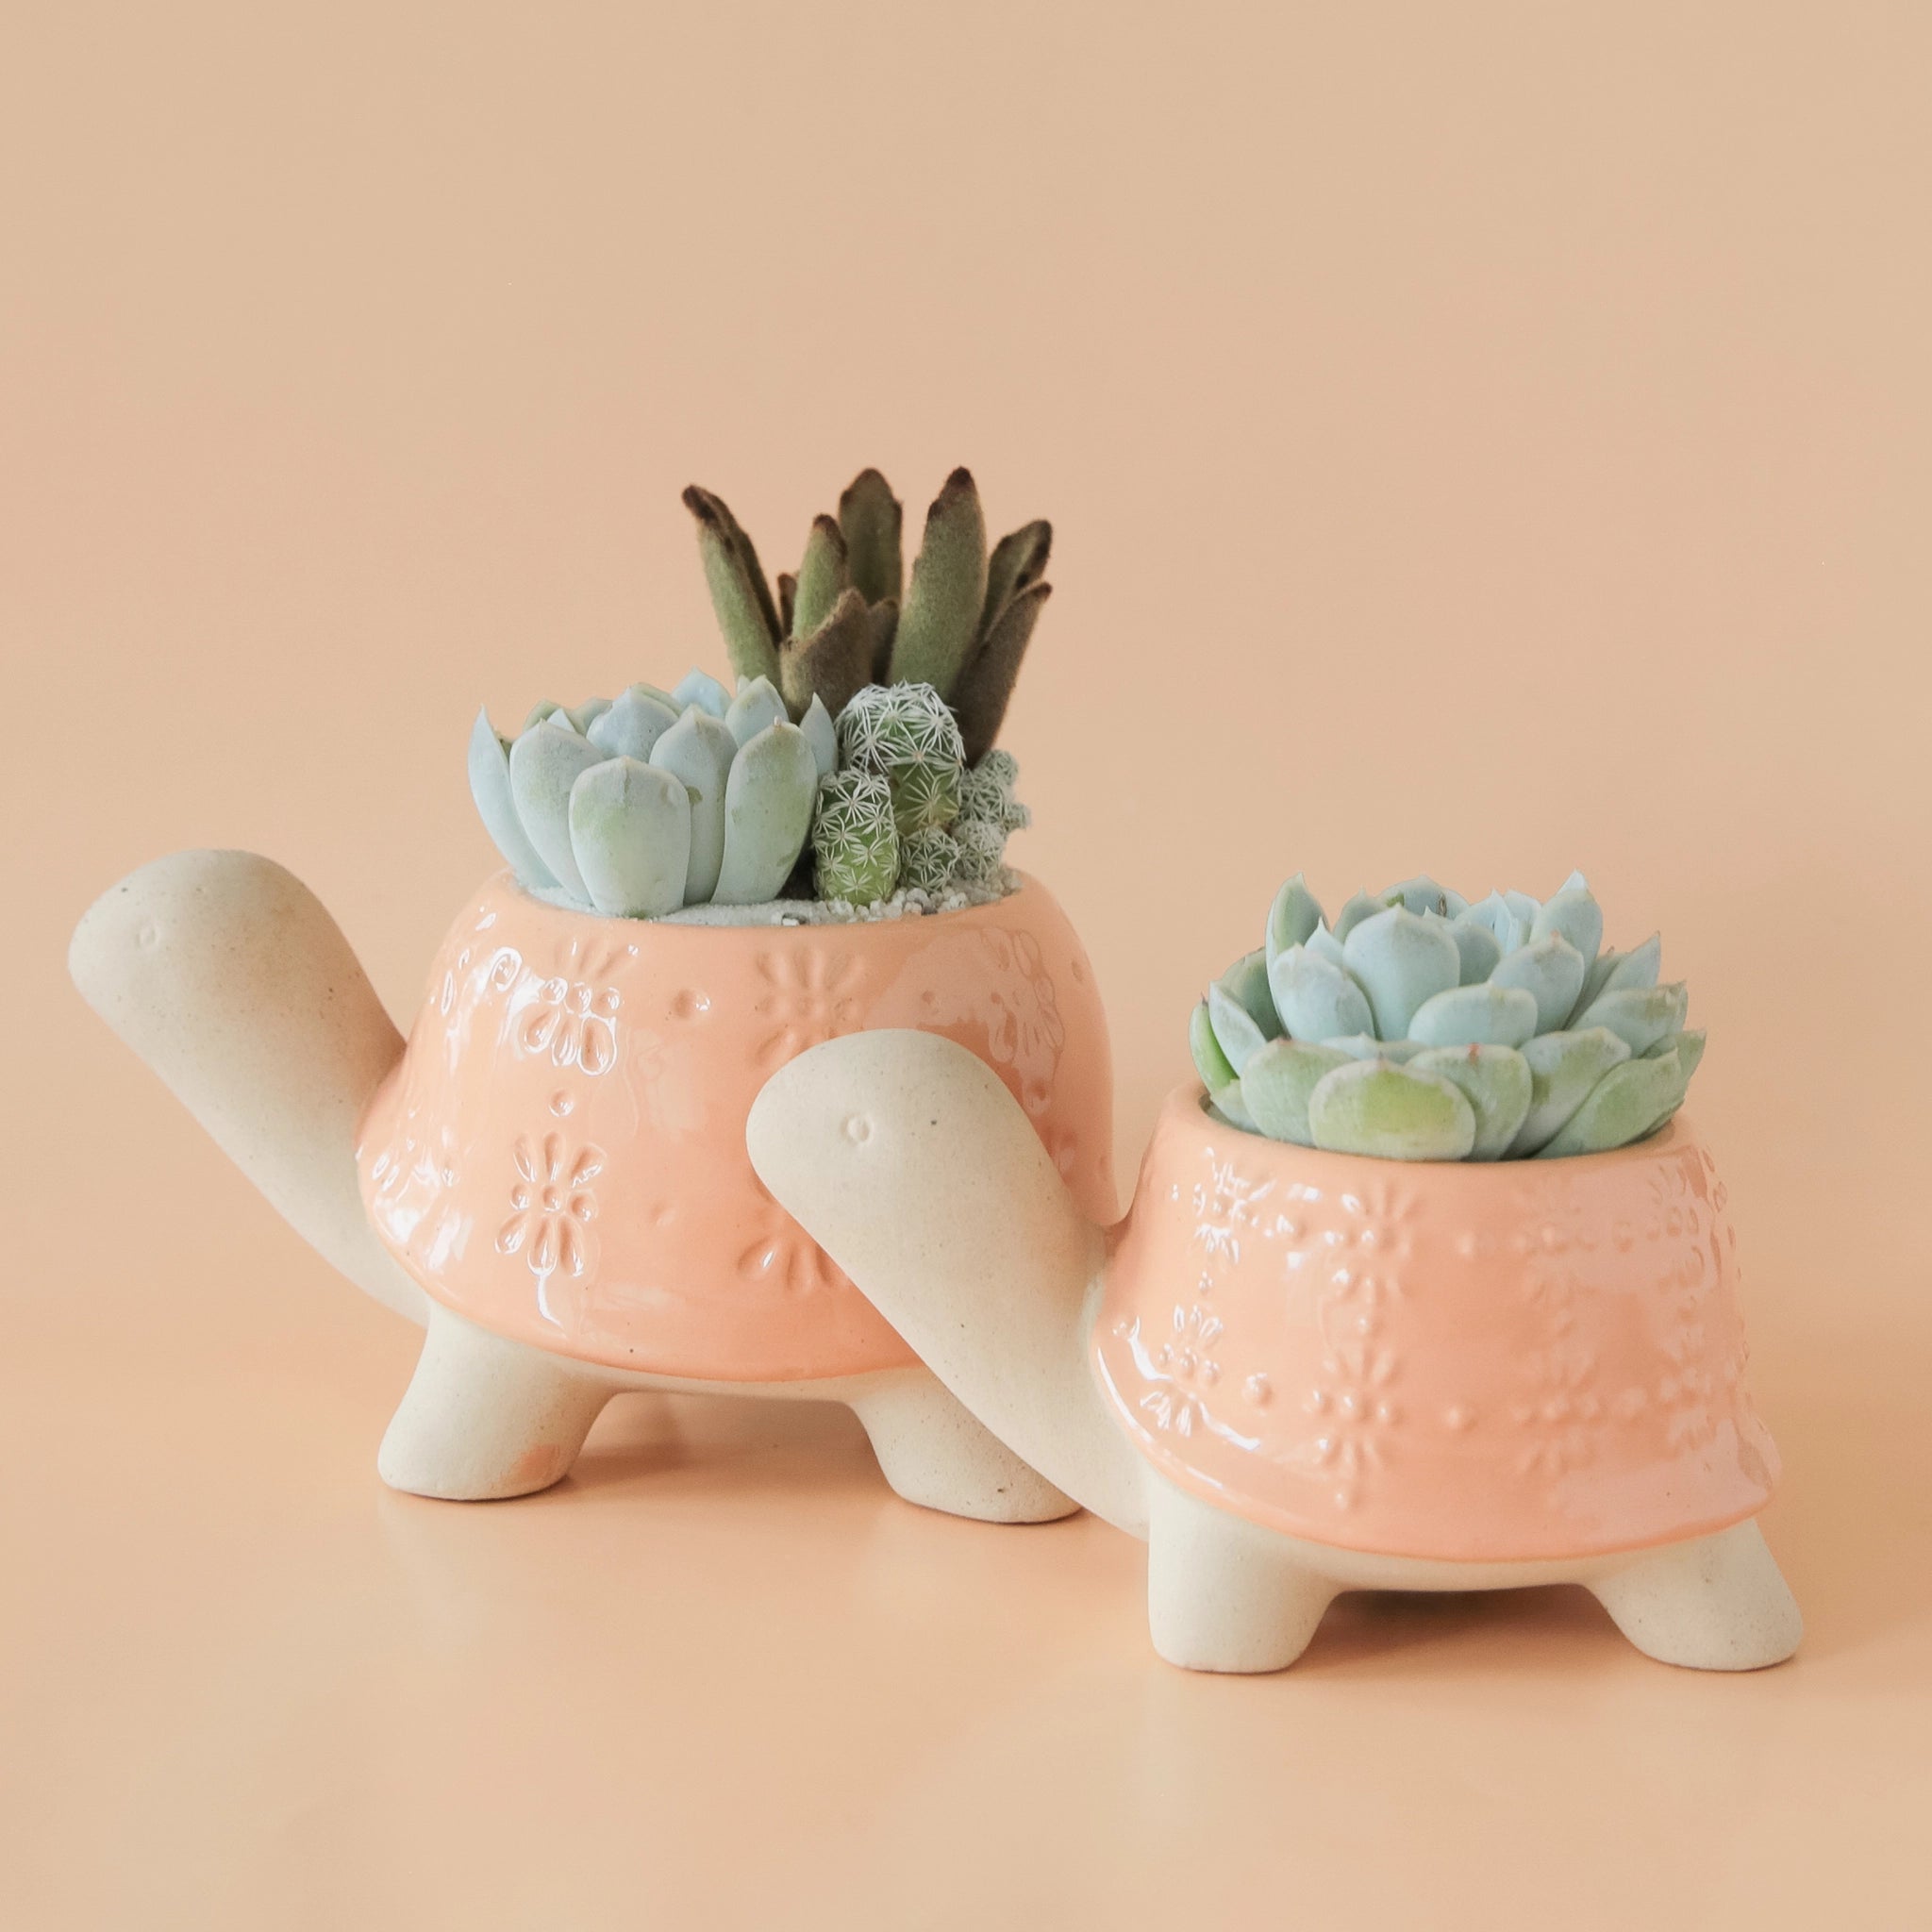 On a peachy background is two different sized ceramic planters in the shape of a turtle with a light orange "shell" that has a subtle floral texture. The planters are filled with succulents and cacti that are sold separately.